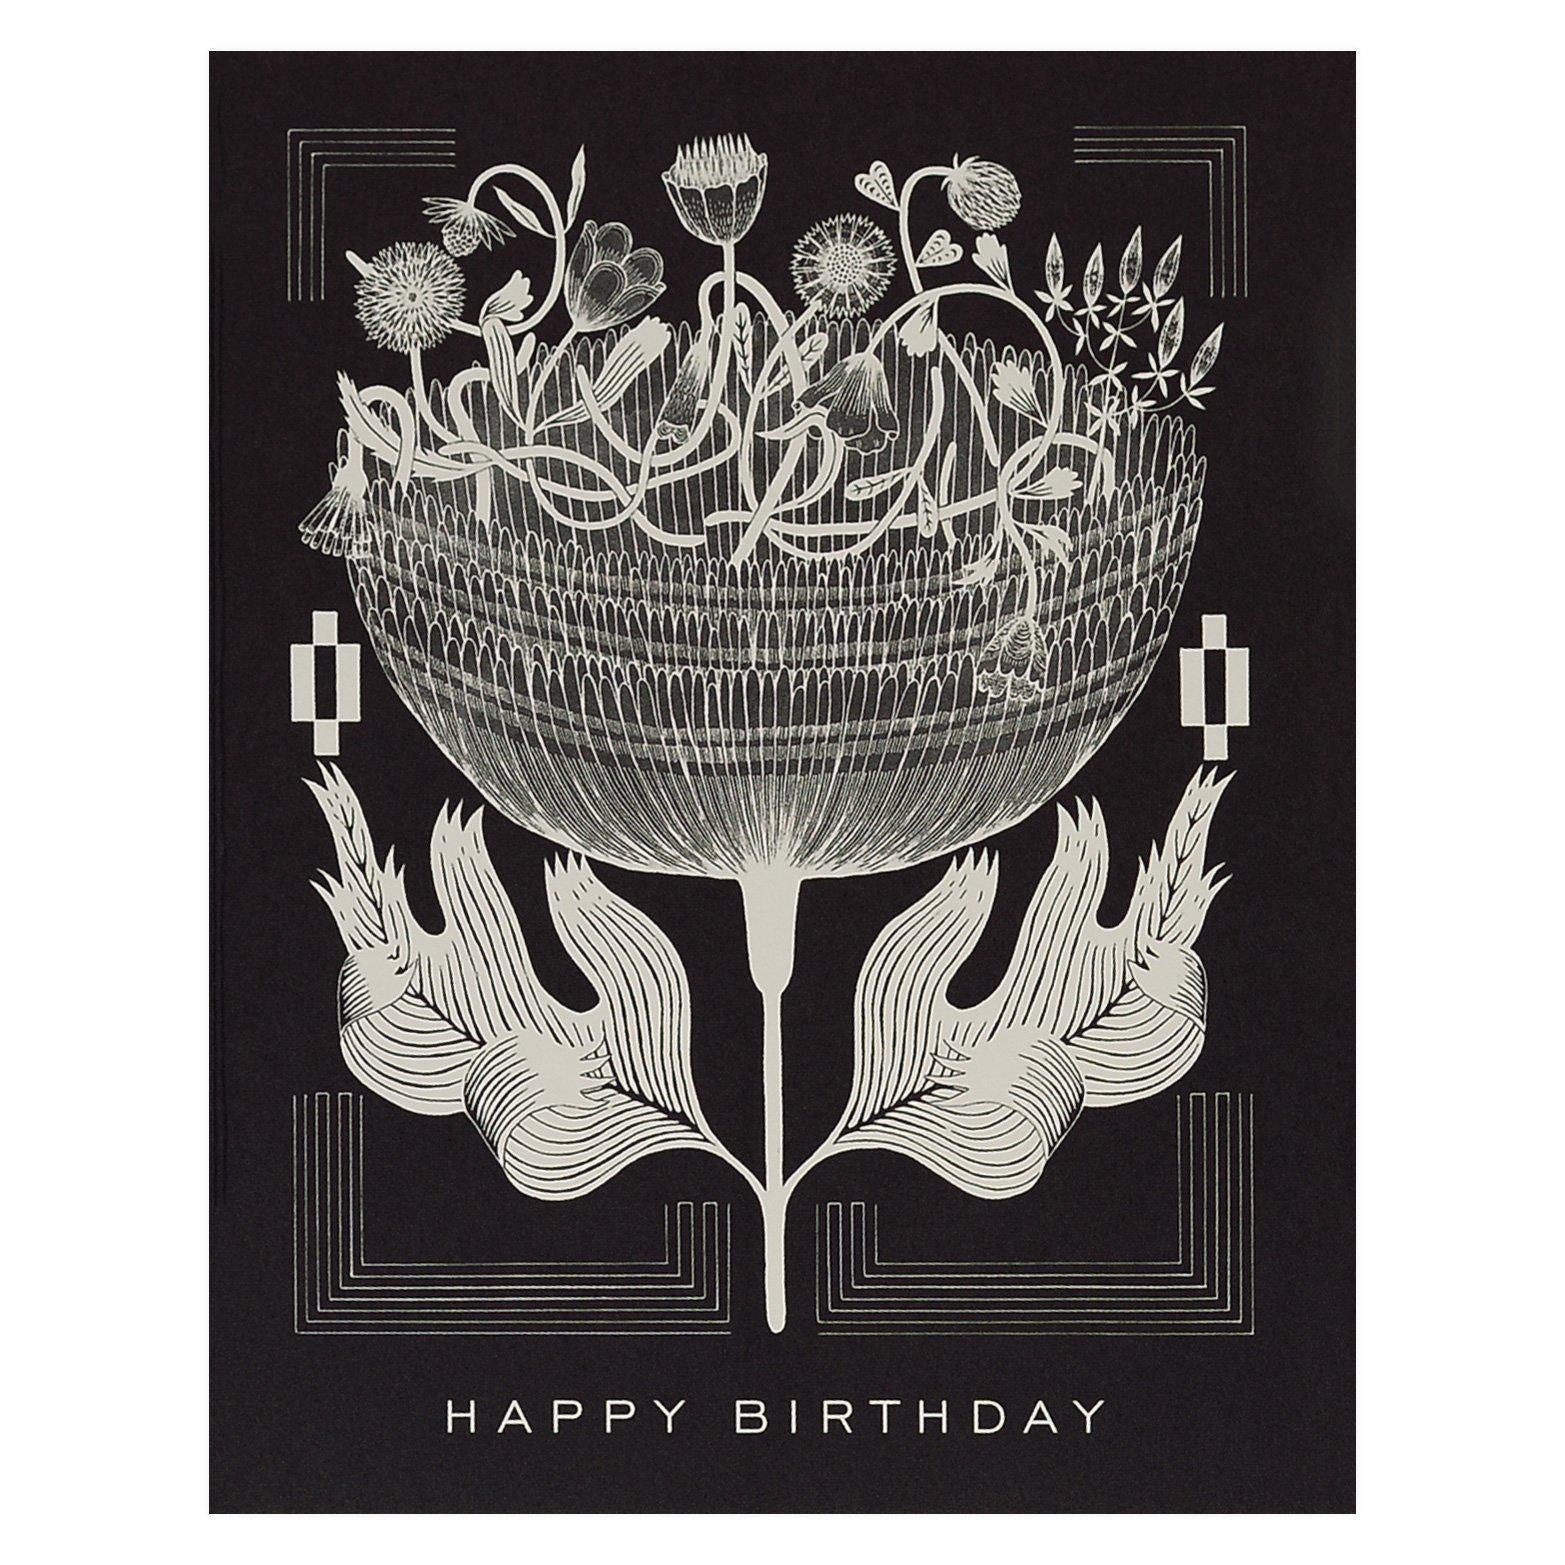 Red Cap Cards Black and White Birthday Card 